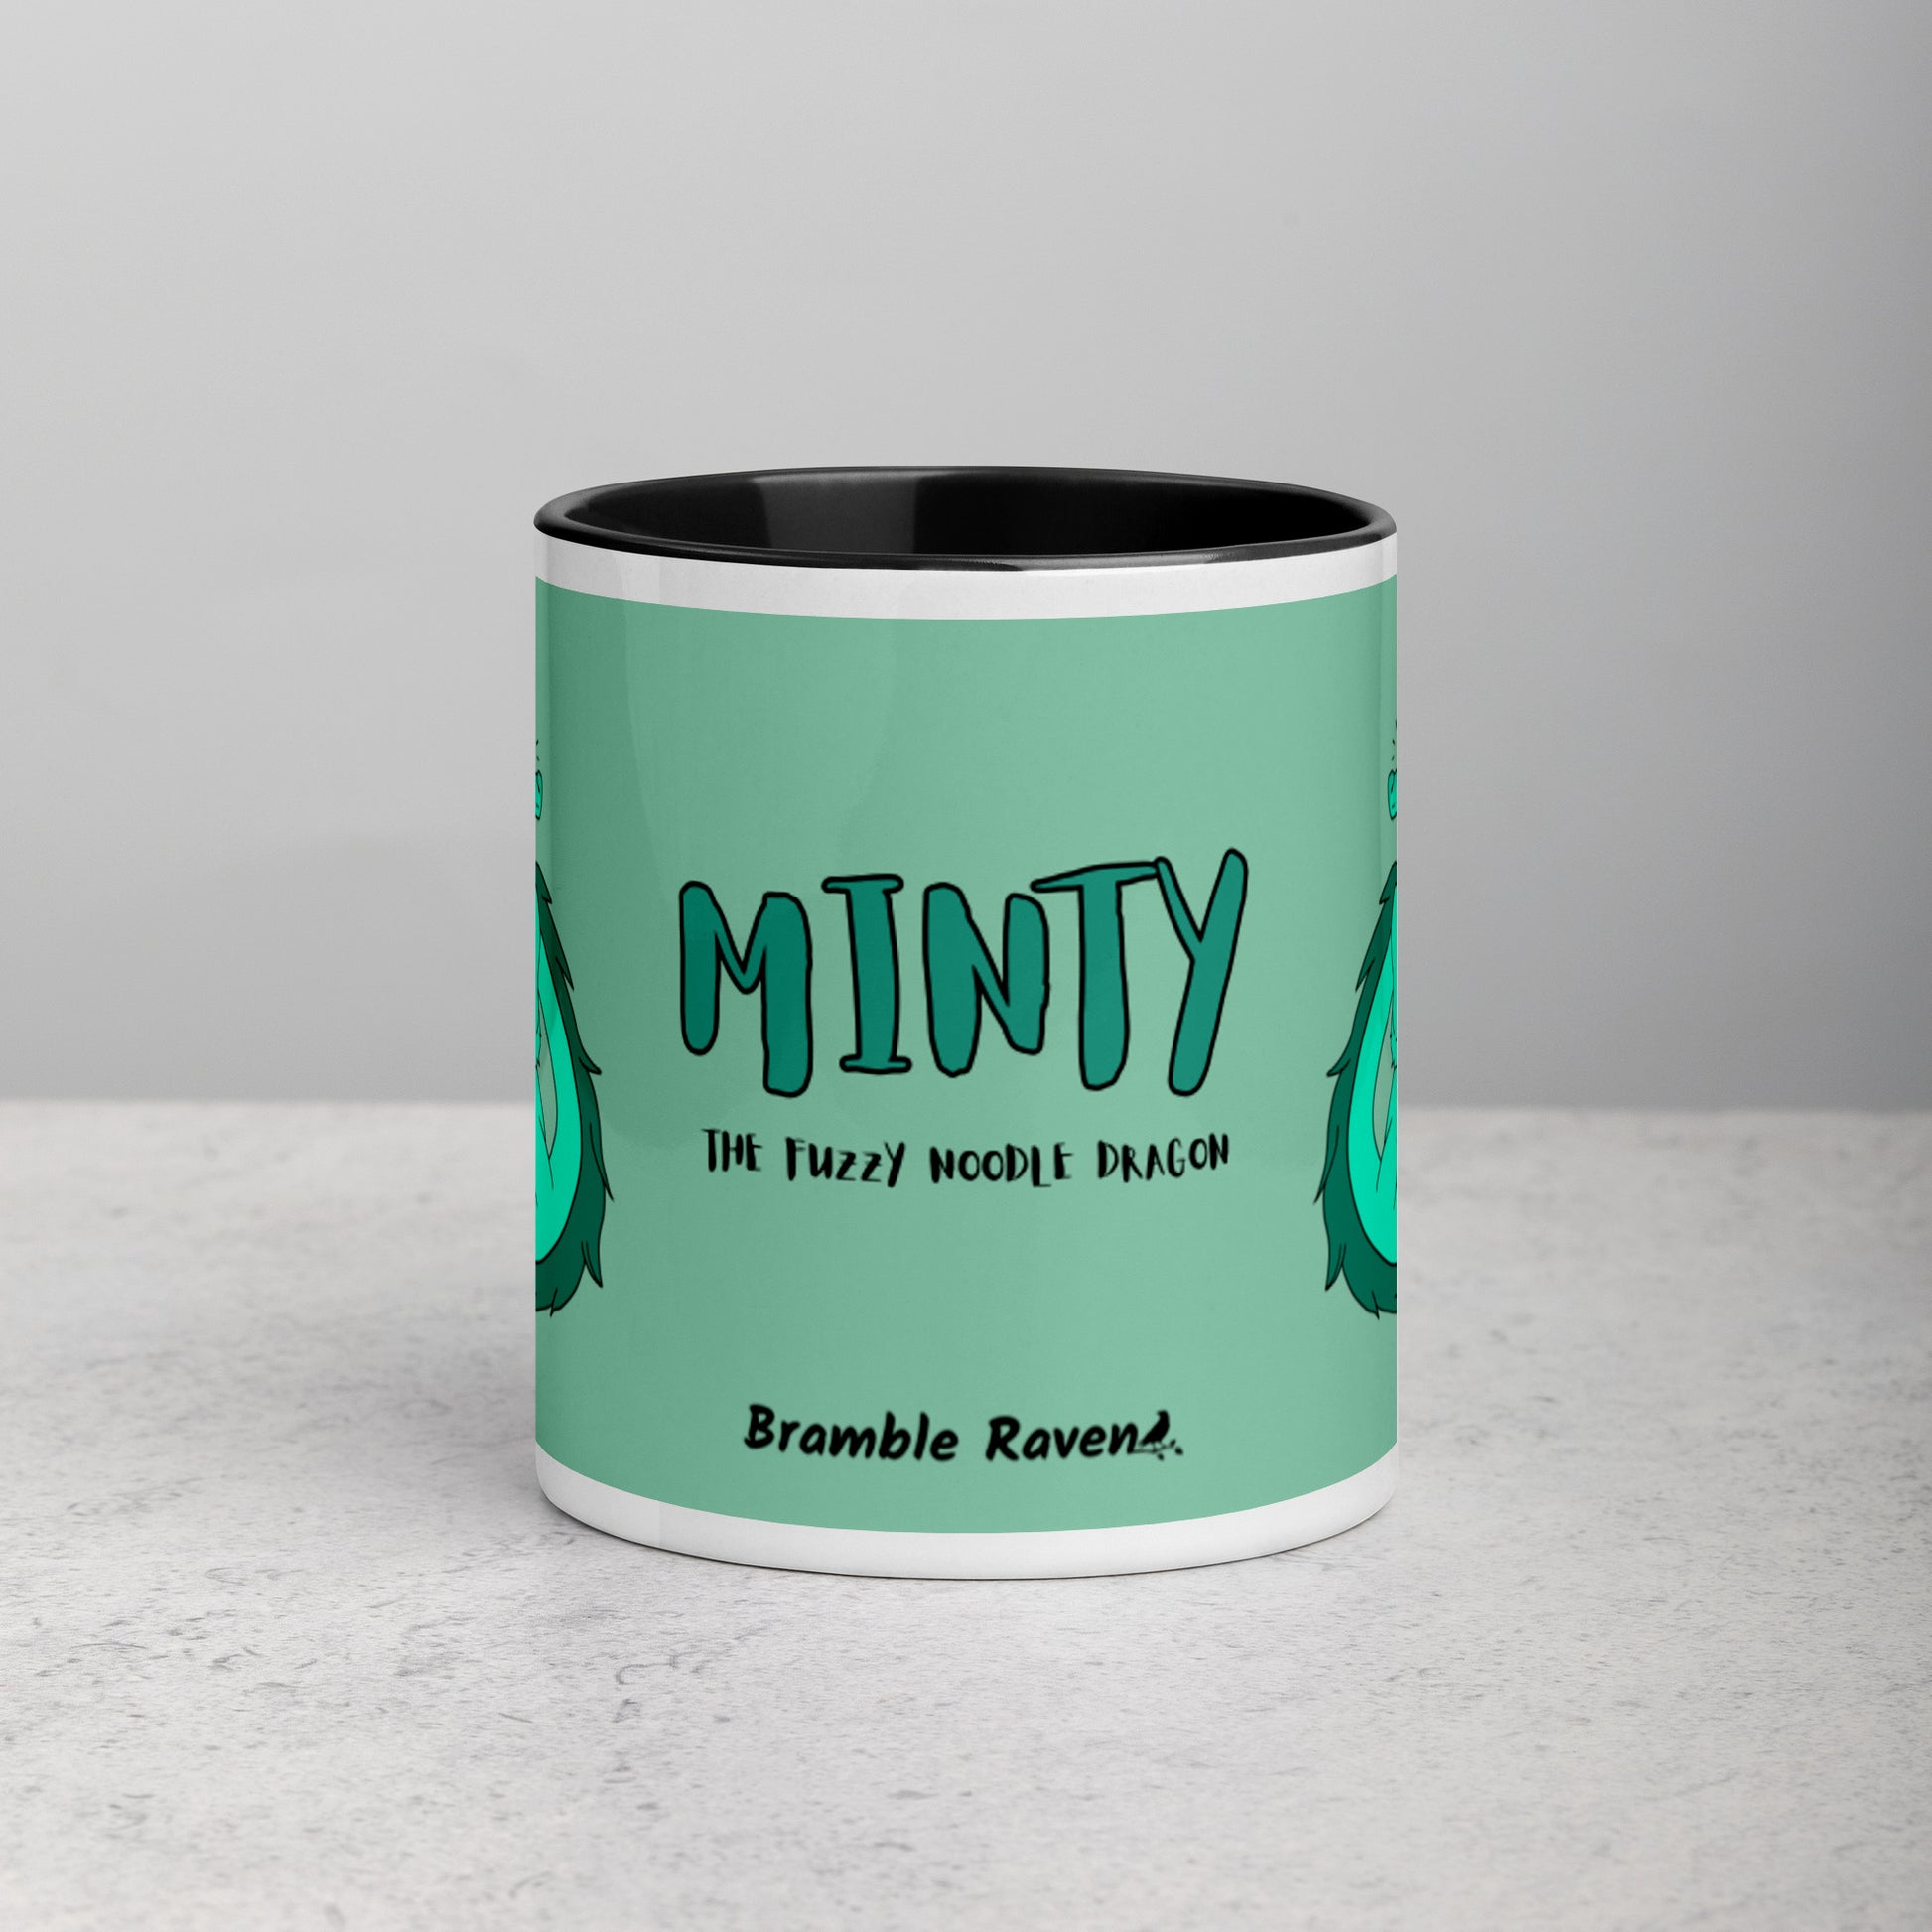 11 ounce white ceramic mug. Black inside and handle. Features double-sided image of Minty the Fuzzy Noodle Dragon on a green background. Shown on tabletop. Front view shows Minty the Fuzzy Noodle Dragon text and Bramble Raven logo.